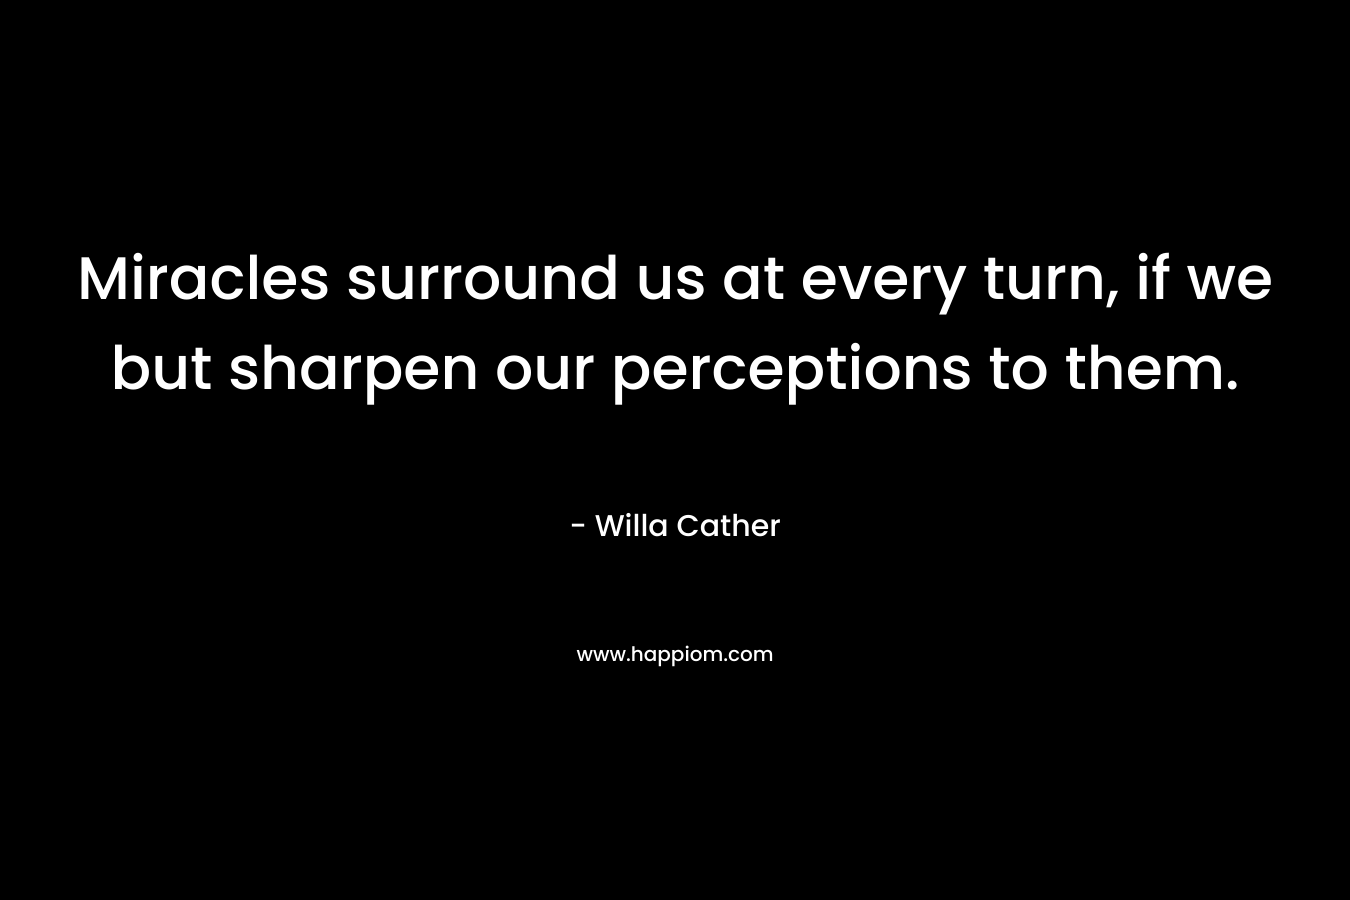 Miracles surround us at every turn, if we but sharpen our perceptions to them. – Willa Cather